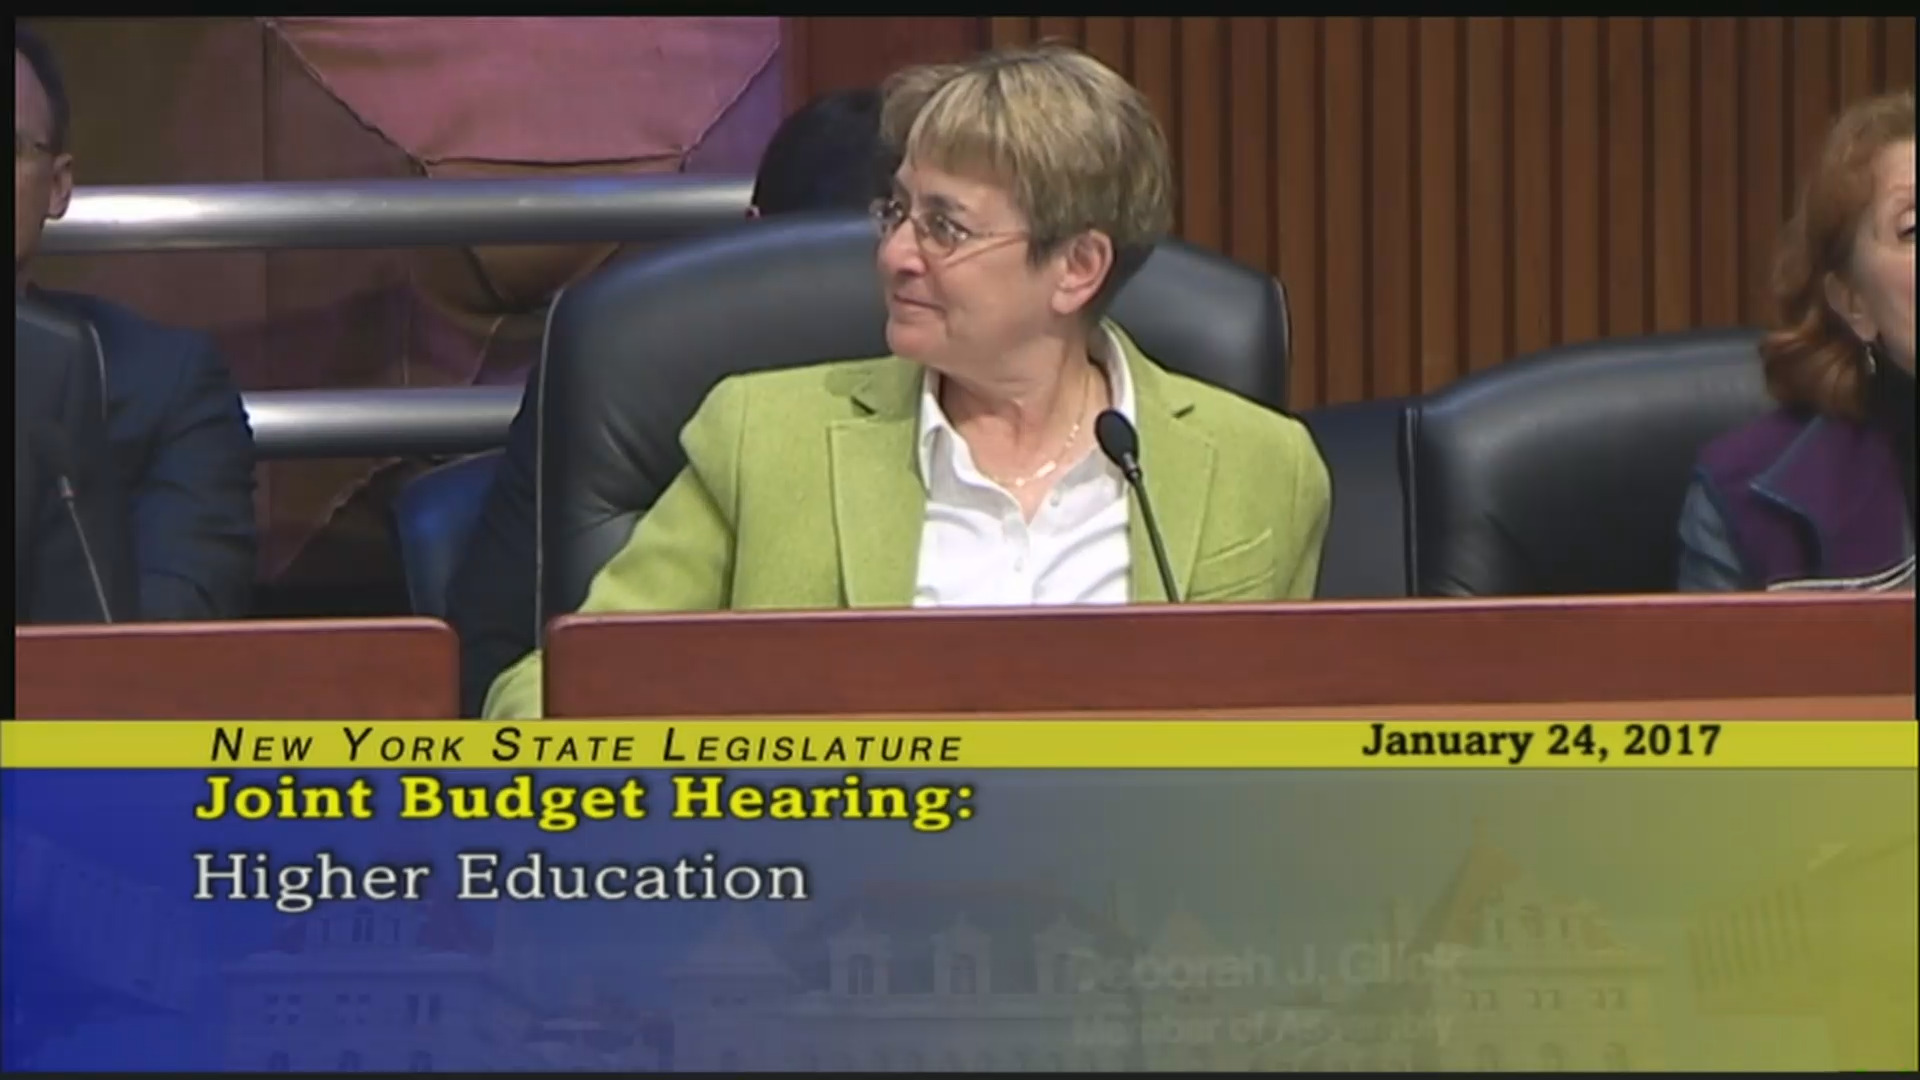 Q & A During Joint Budget Hearing on Higher Education